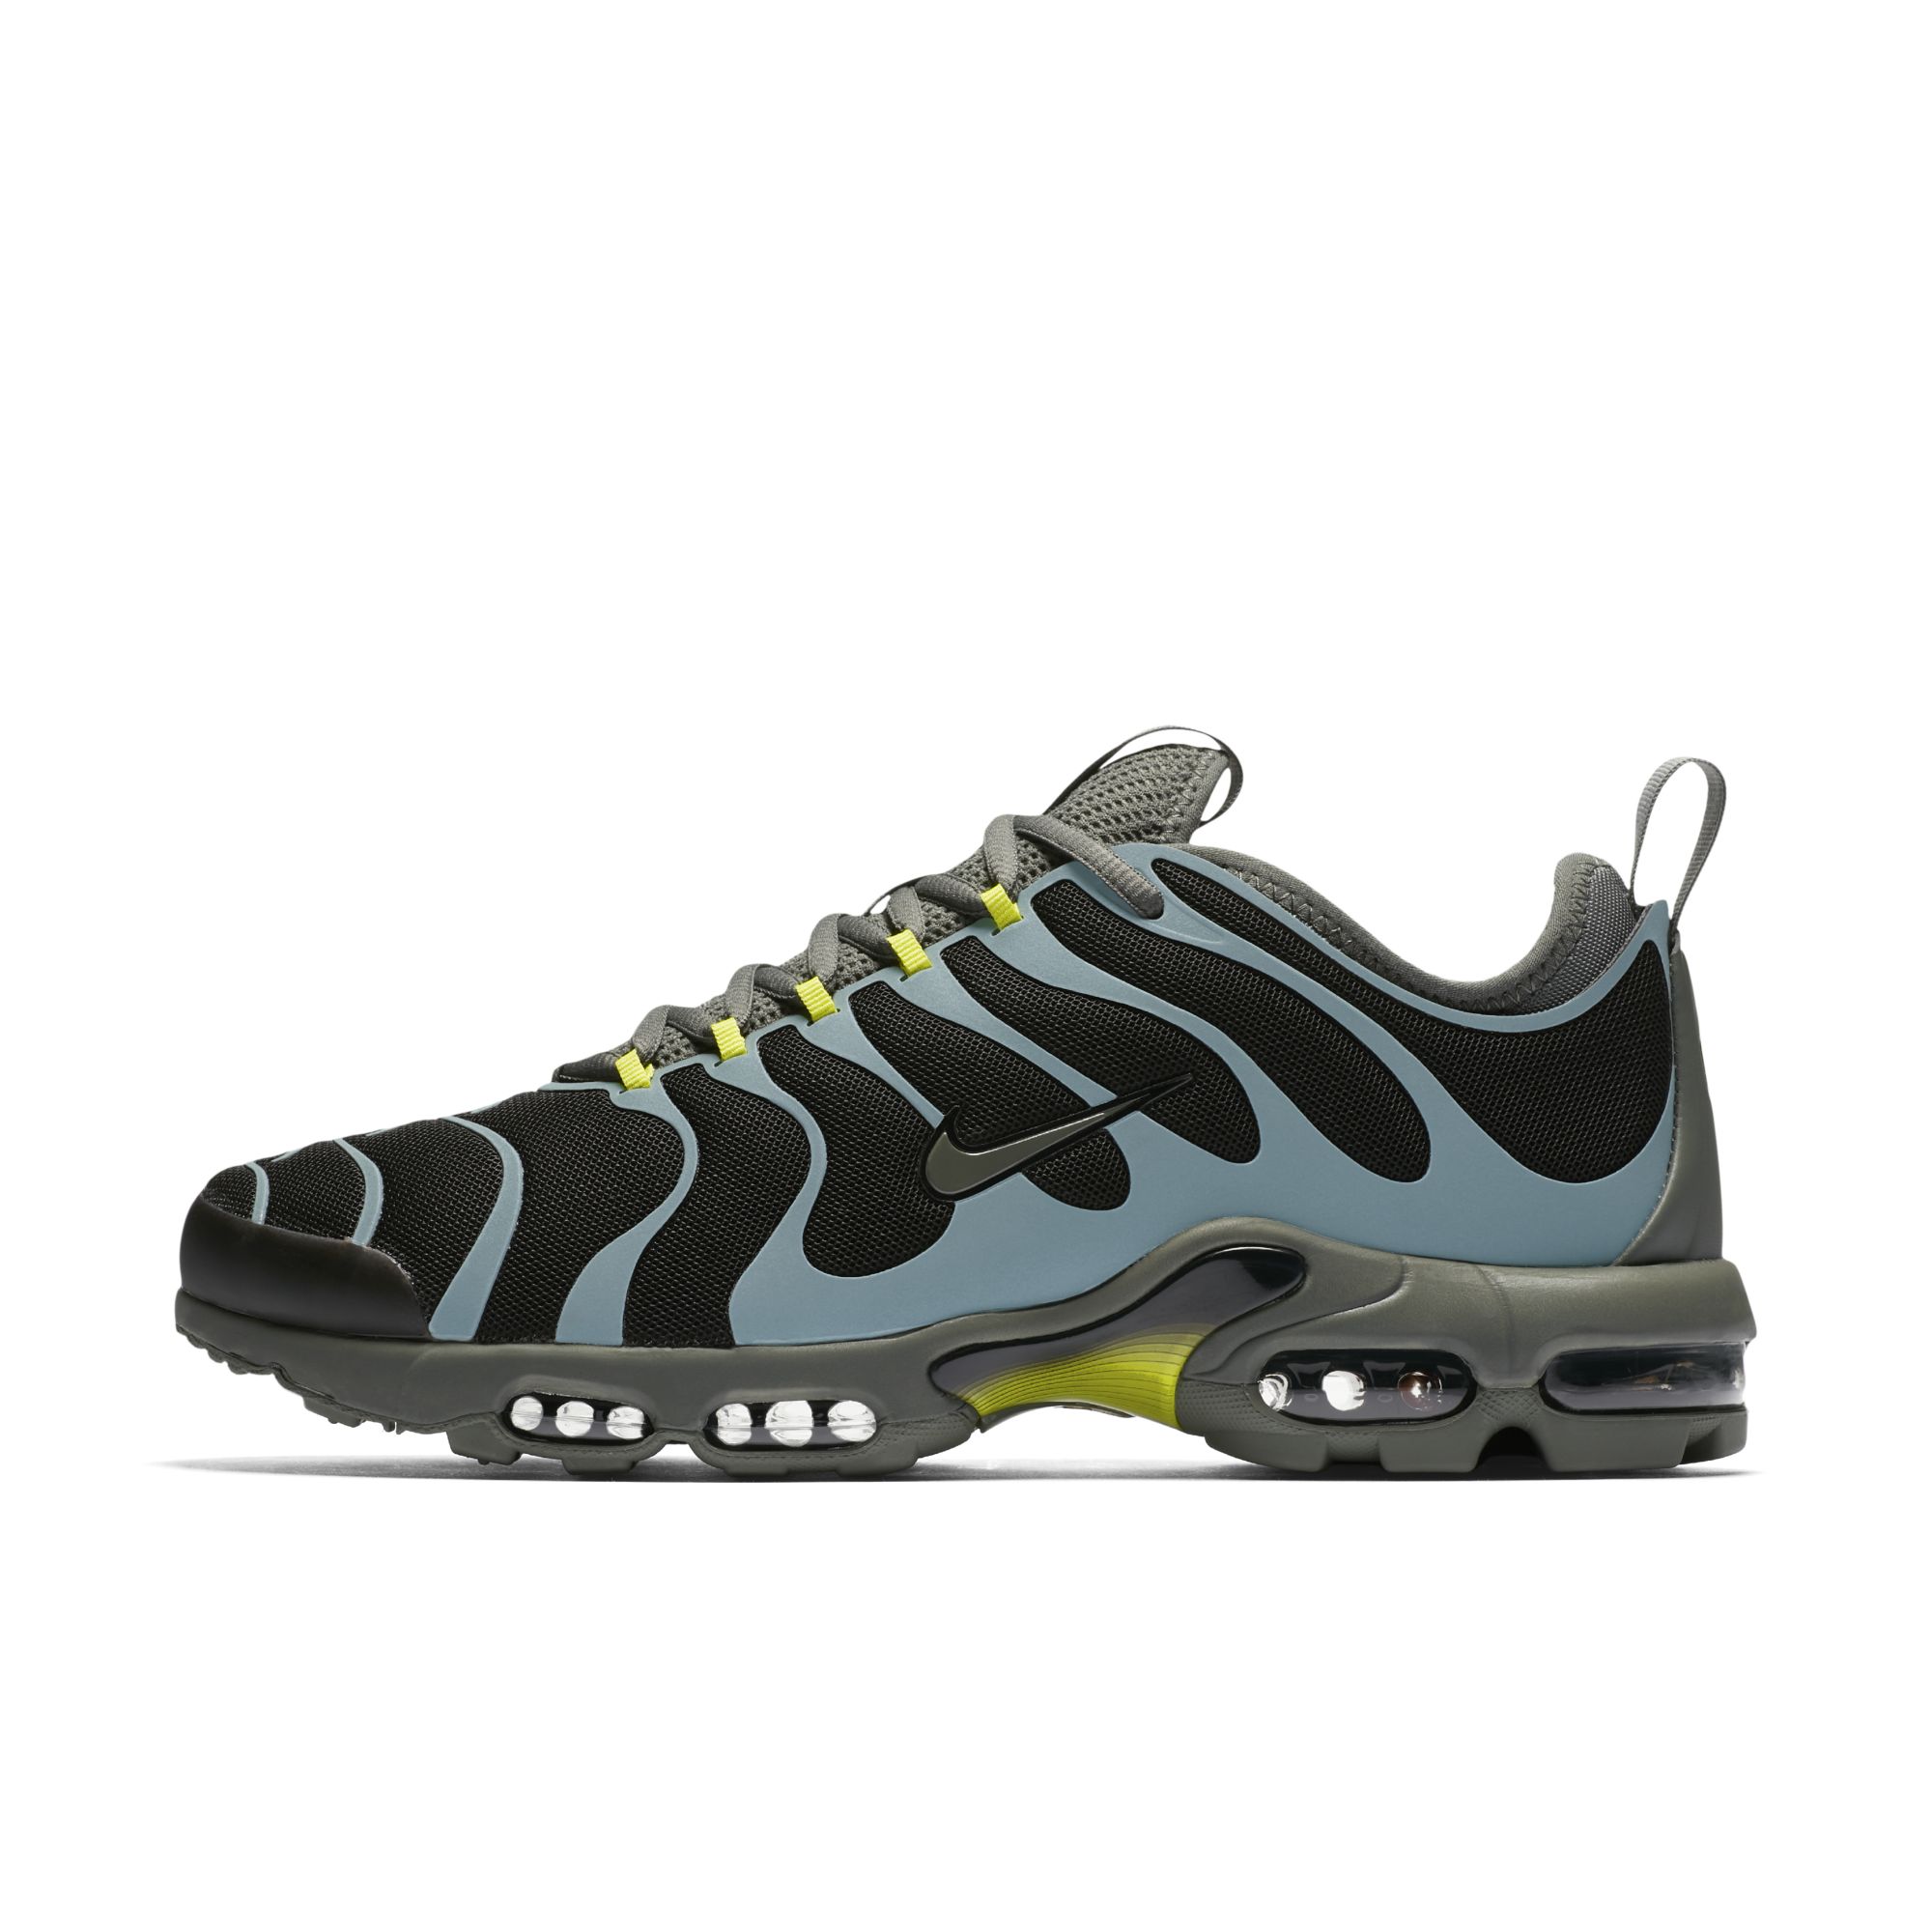 A Sneak Peek at Several Air Max Plus Models to Come - WearTesters